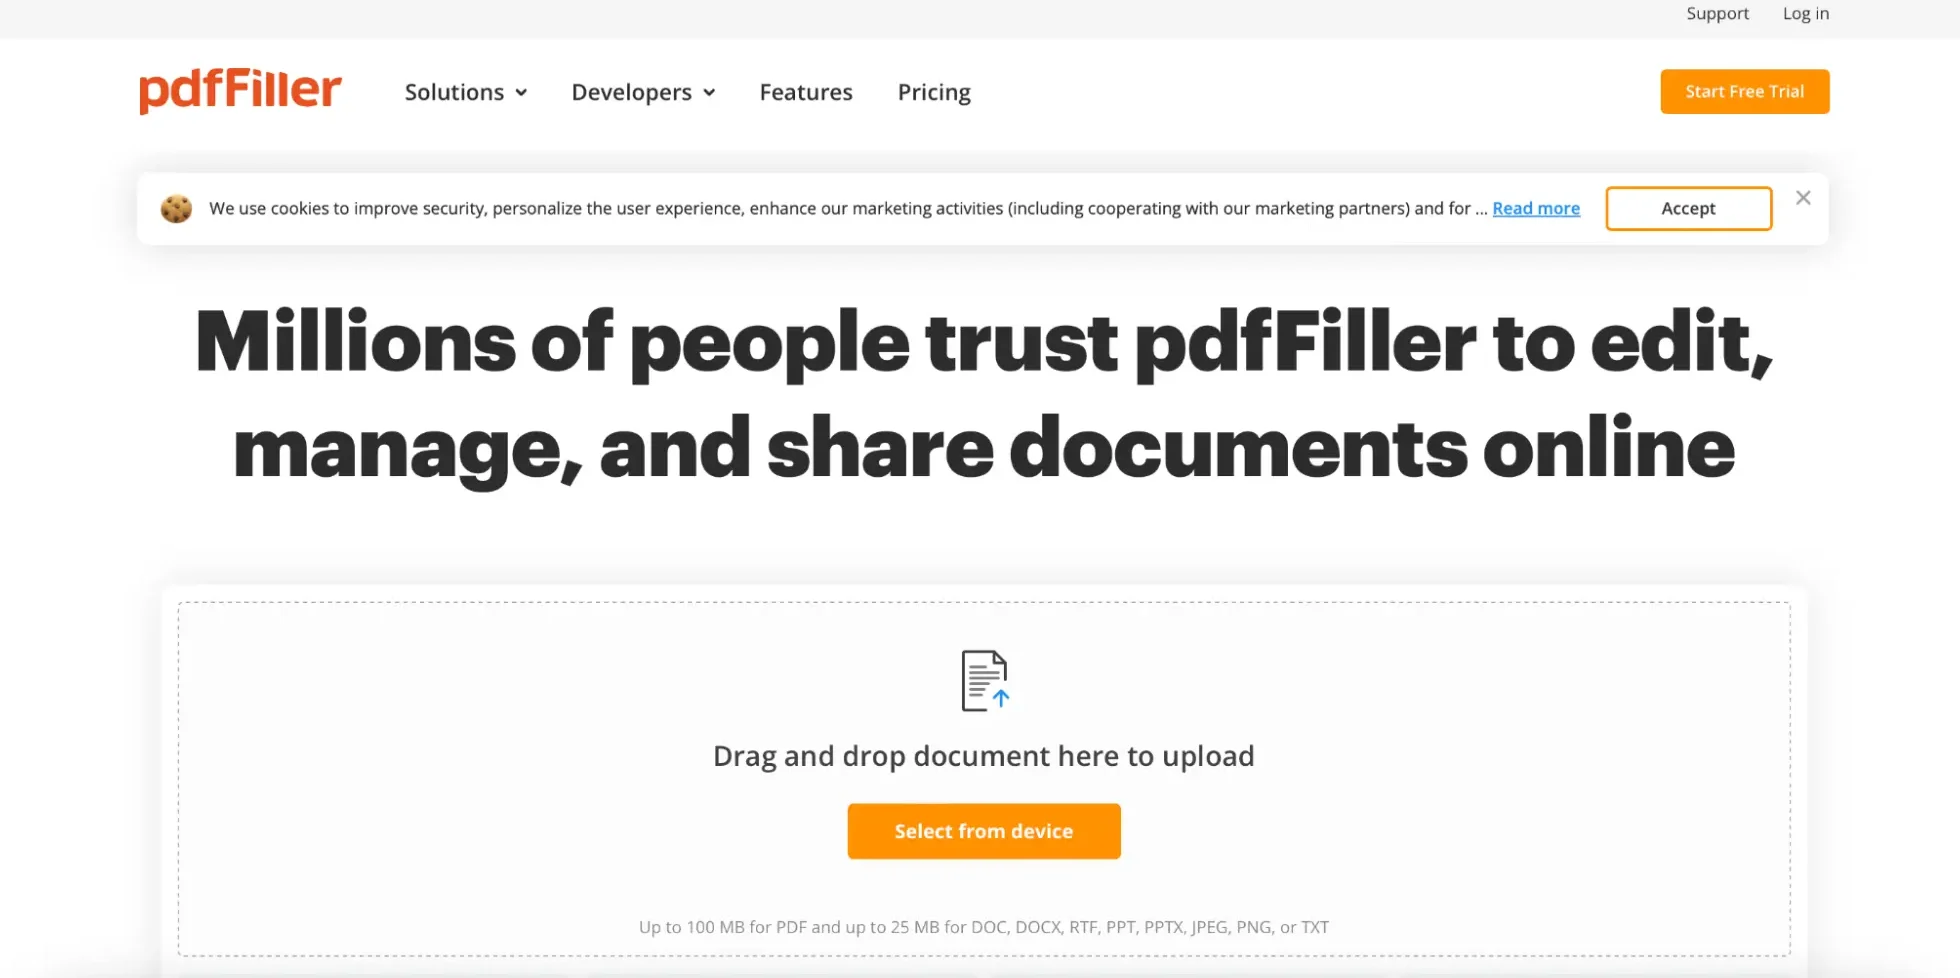 This image shows the pdfFiller home page.